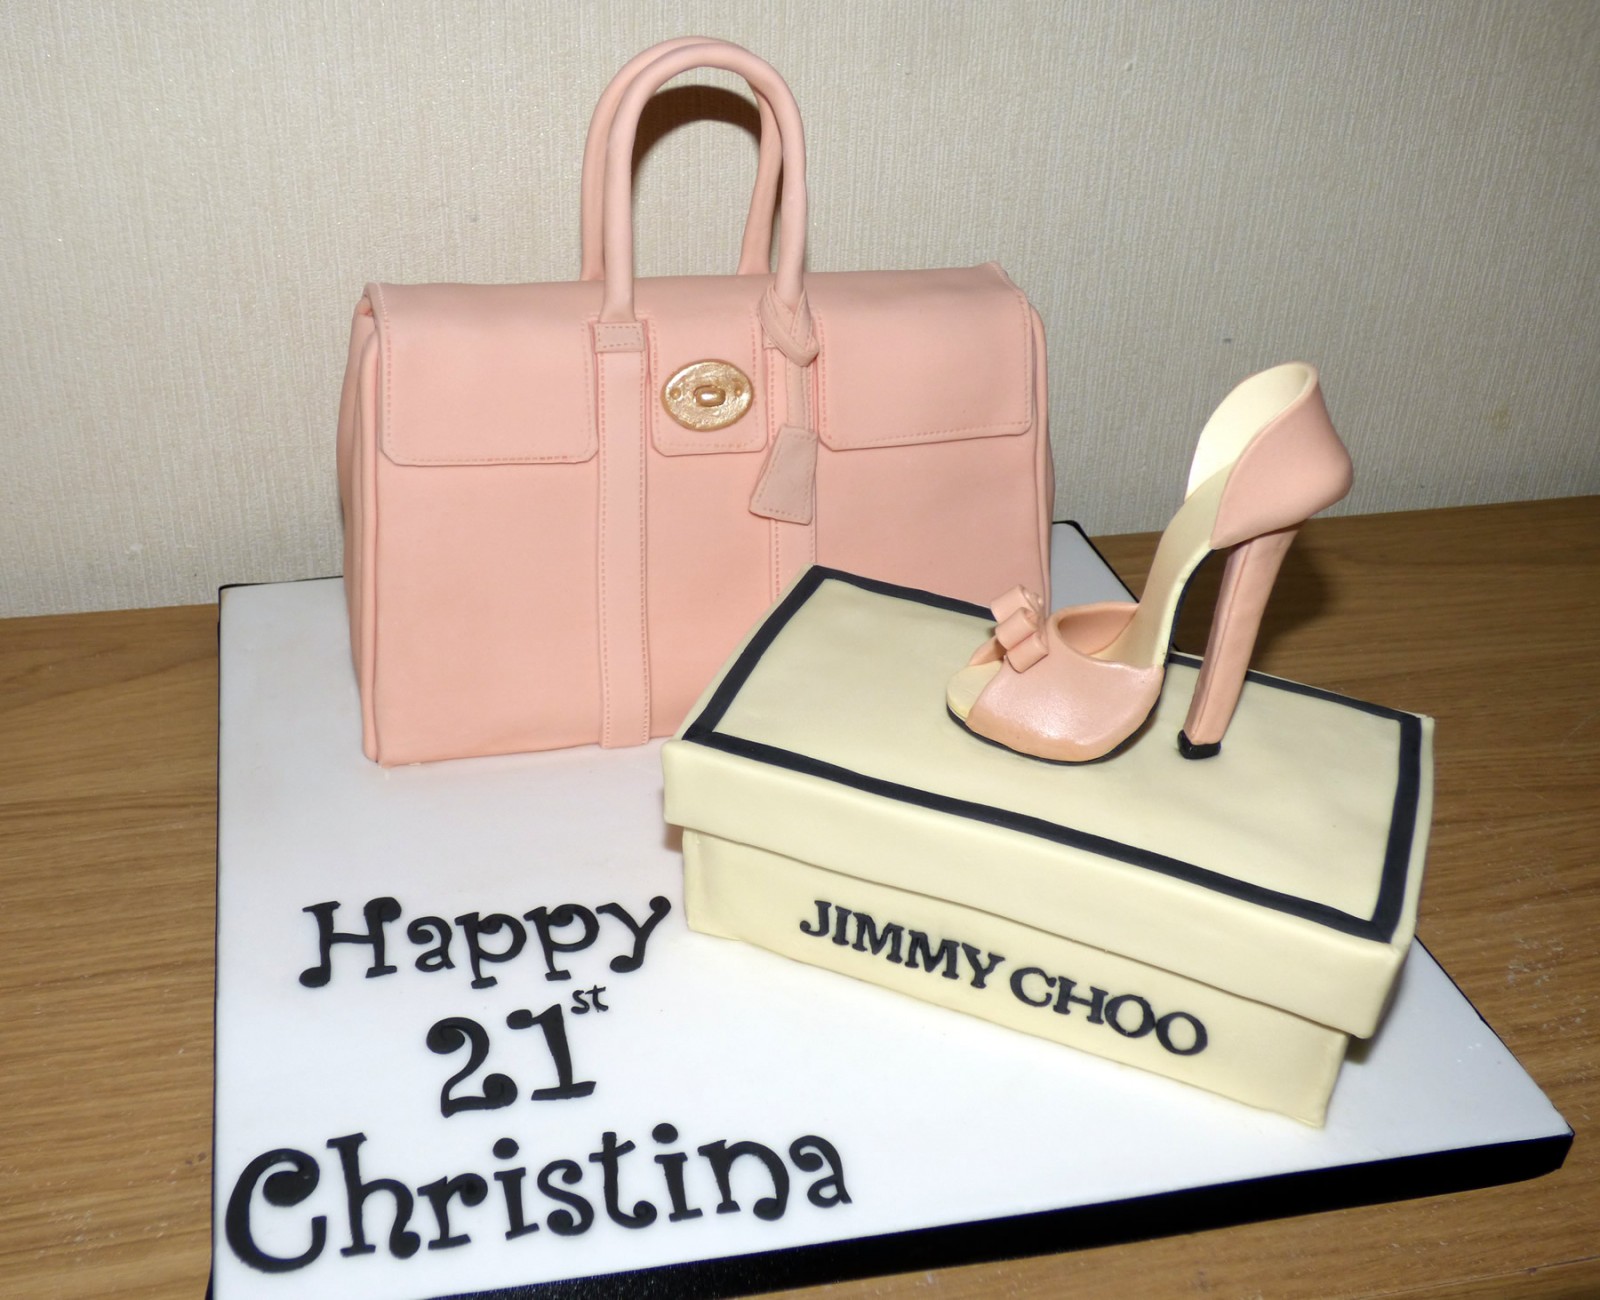 Custom Cakes by Manisha - Jimmy Choo and Burberry shoes, Louis